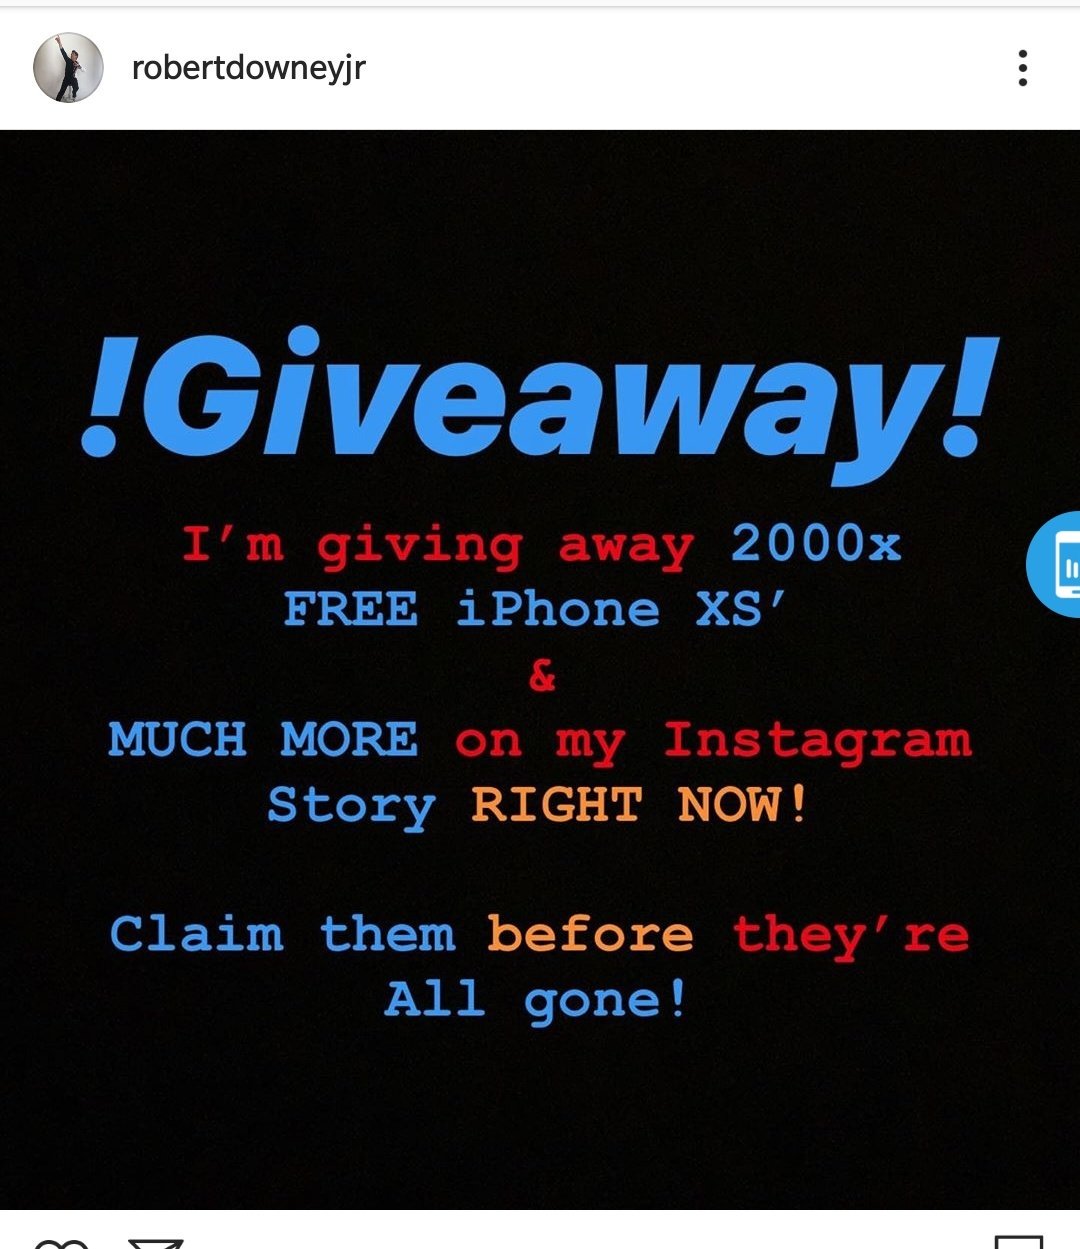 Hacked Instagram Account Of Robert Downey Jr Pushes Iphone Giveaway